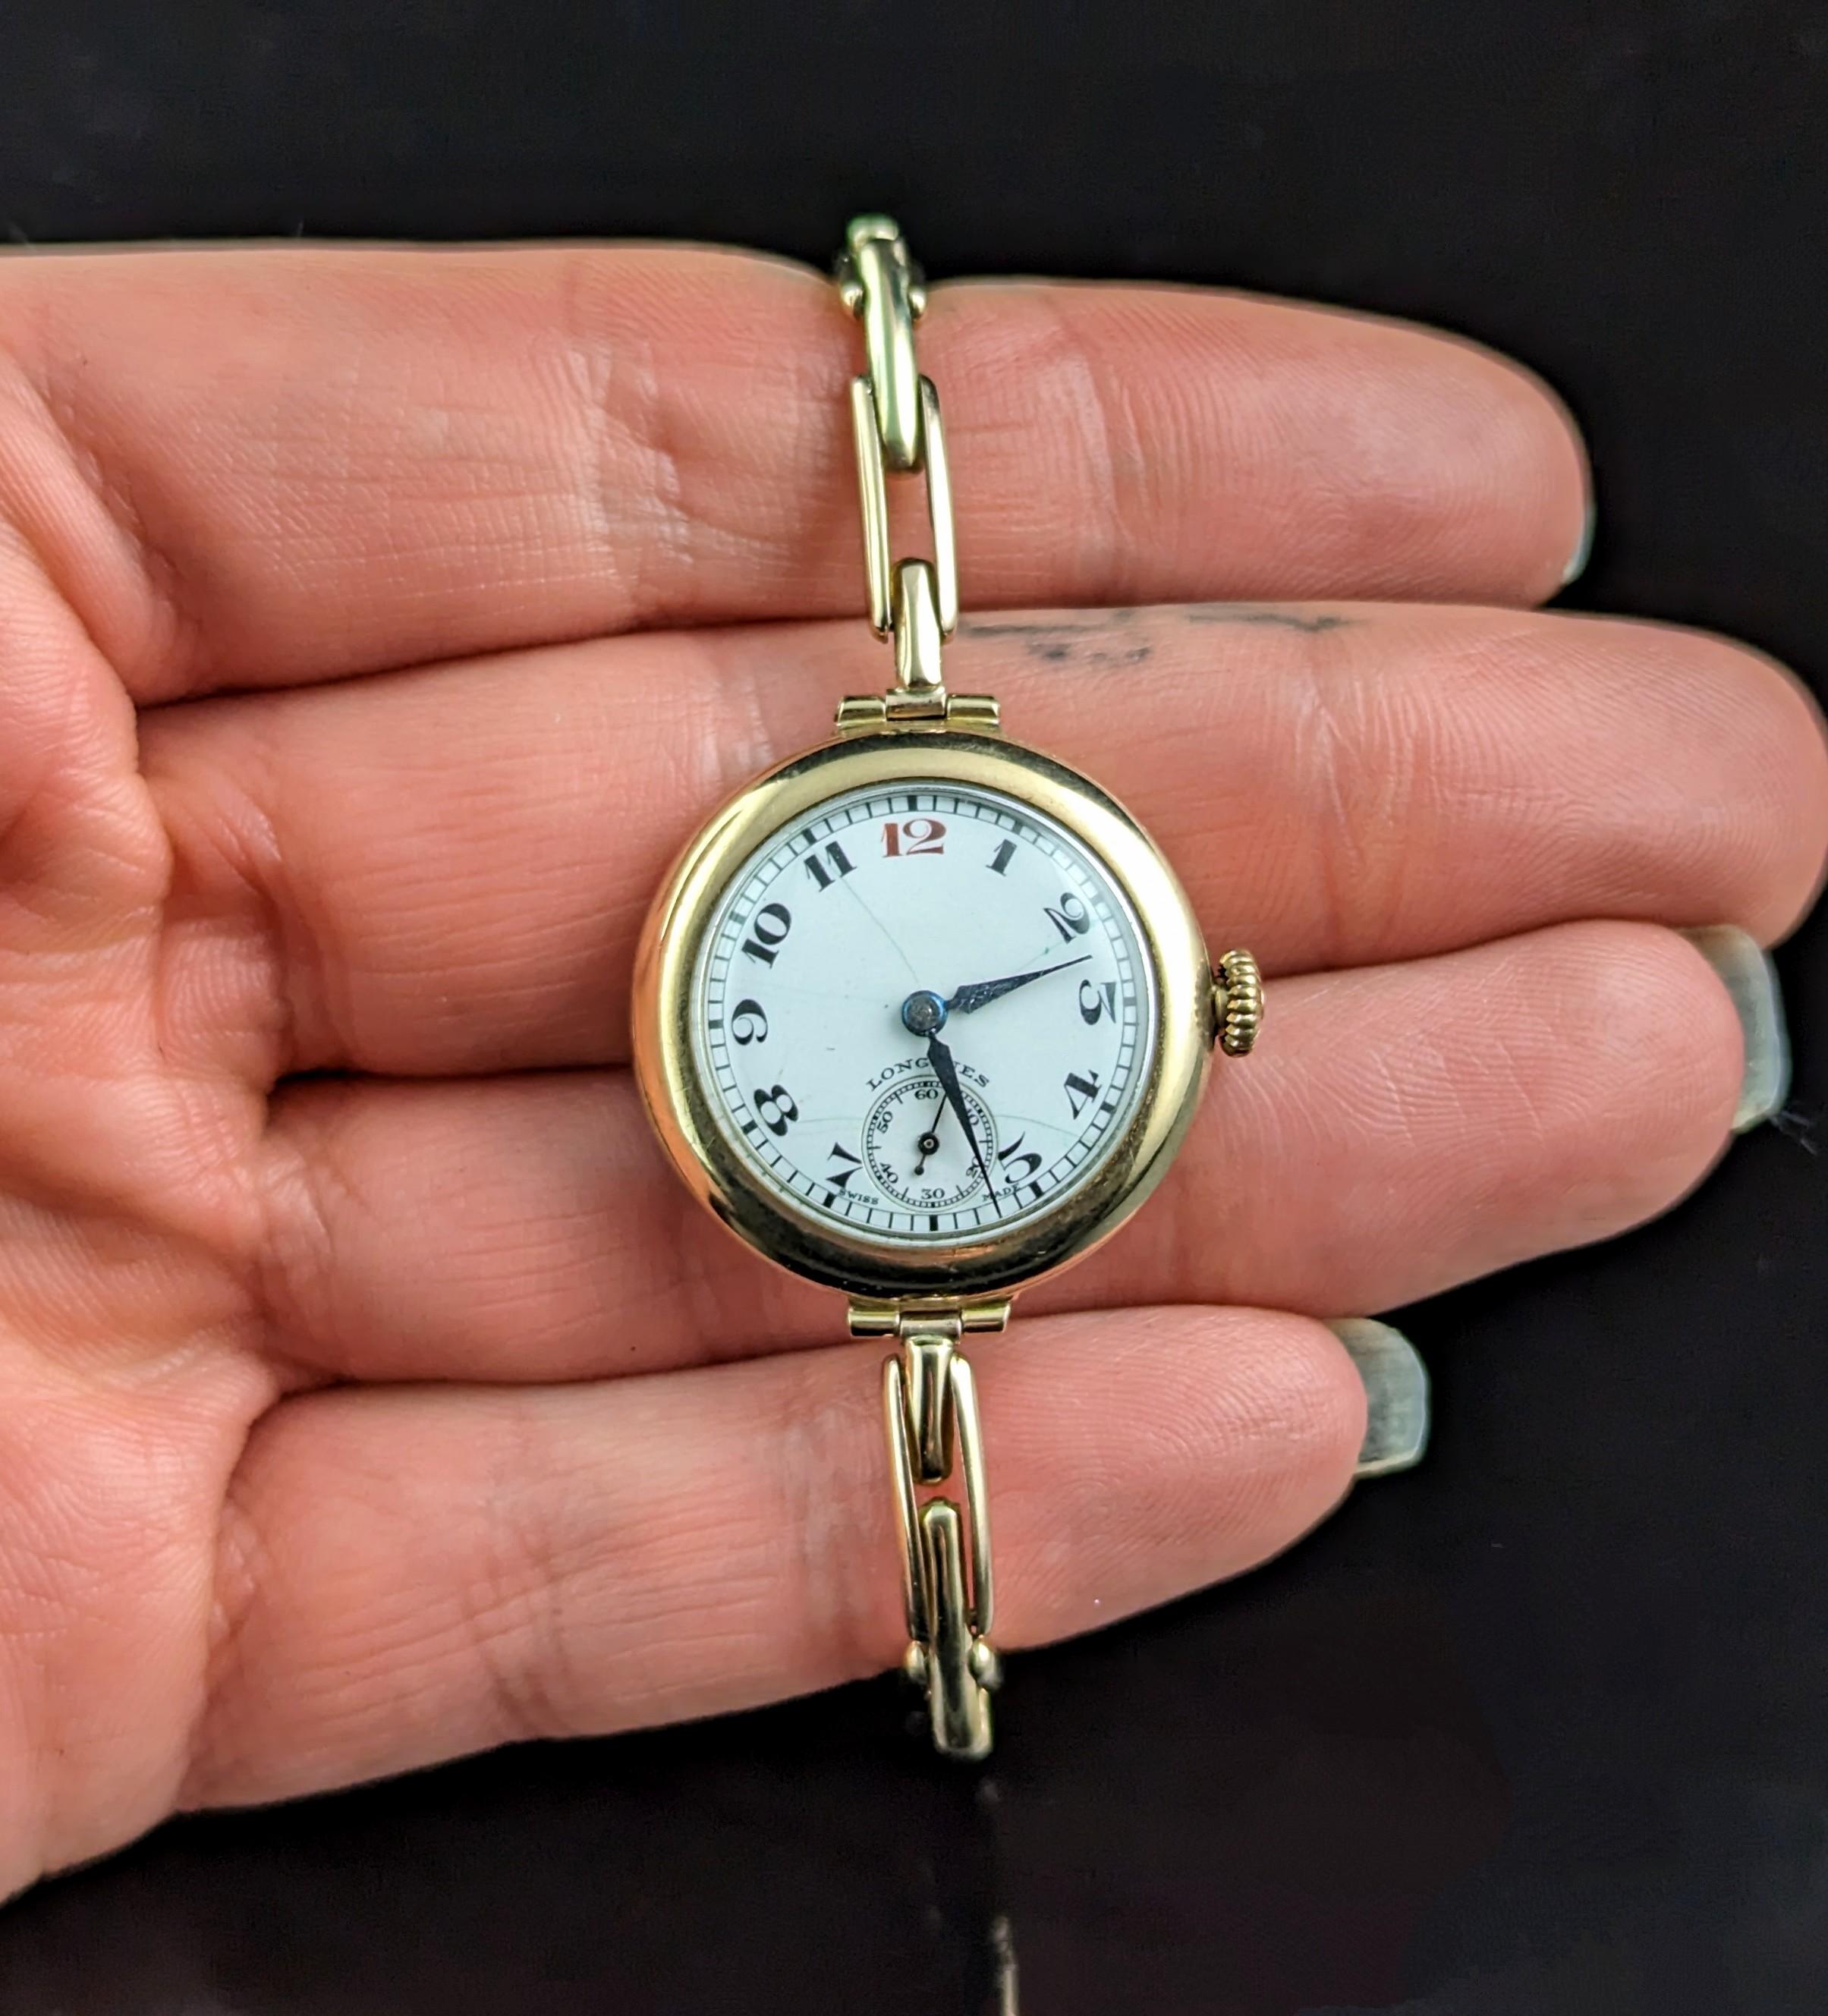 A gorgeous vintage 9ct gold ladies wristwatch.

It has a yellow gold case with a white dial with black Arabic numerals, blued steel hands and a subsidiary second dial, branded just above the seconds dial.

Made by the renowned Longines the dial and